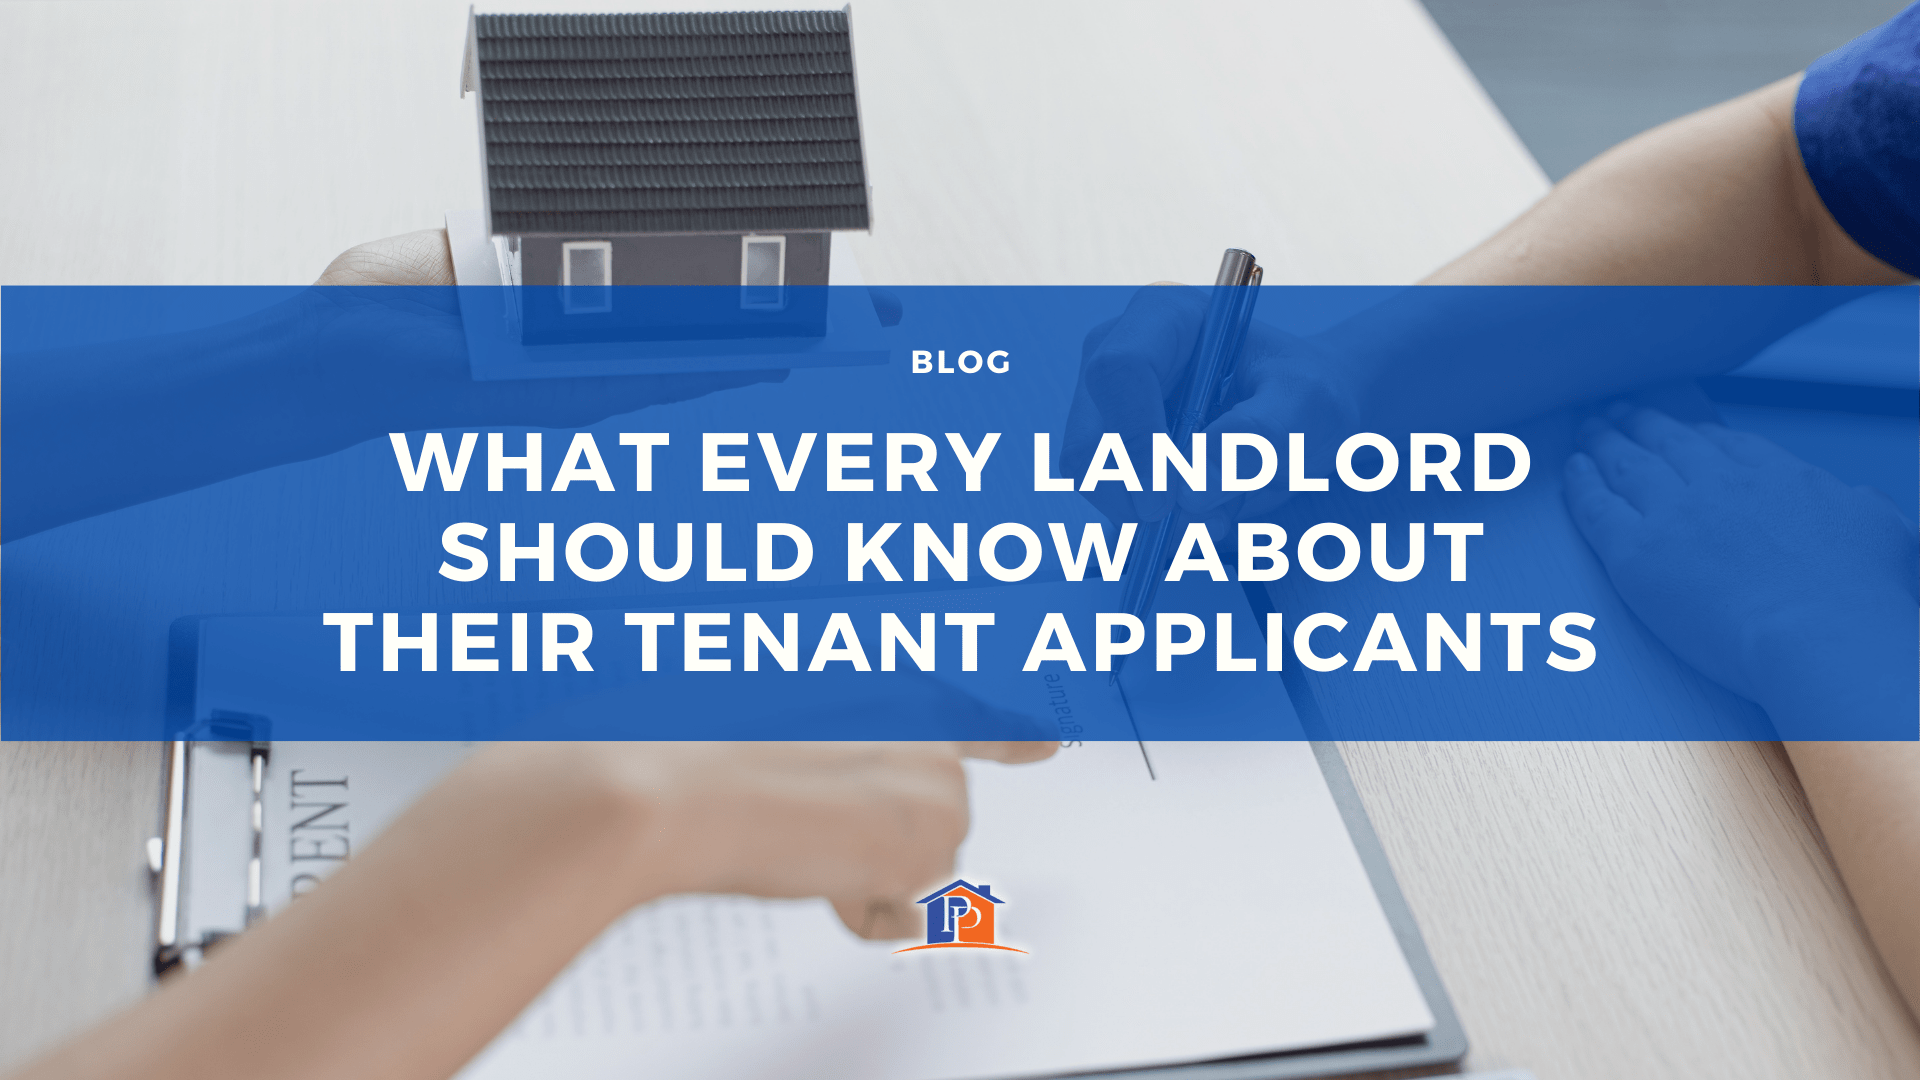 What Every Landlord Should Know About Their Tenant Applicants